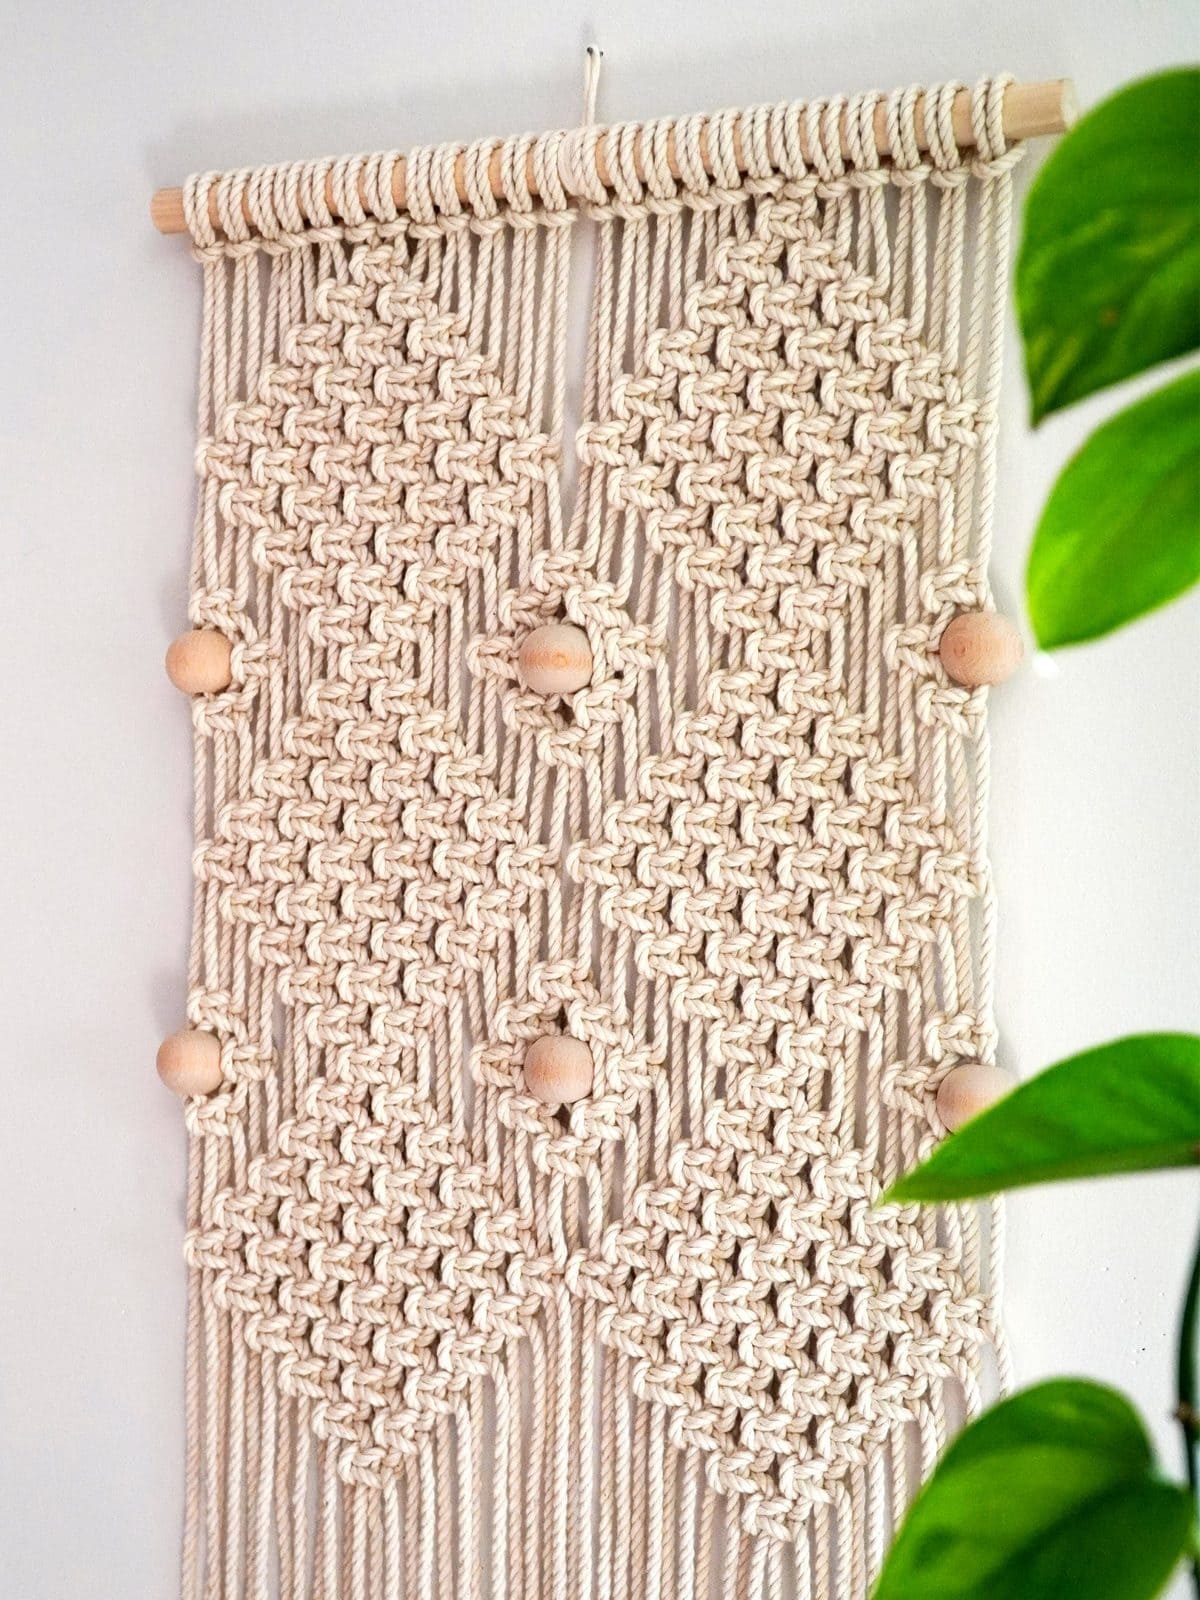 image description: a macrame wallhanging, light coloured rope with wooden beads